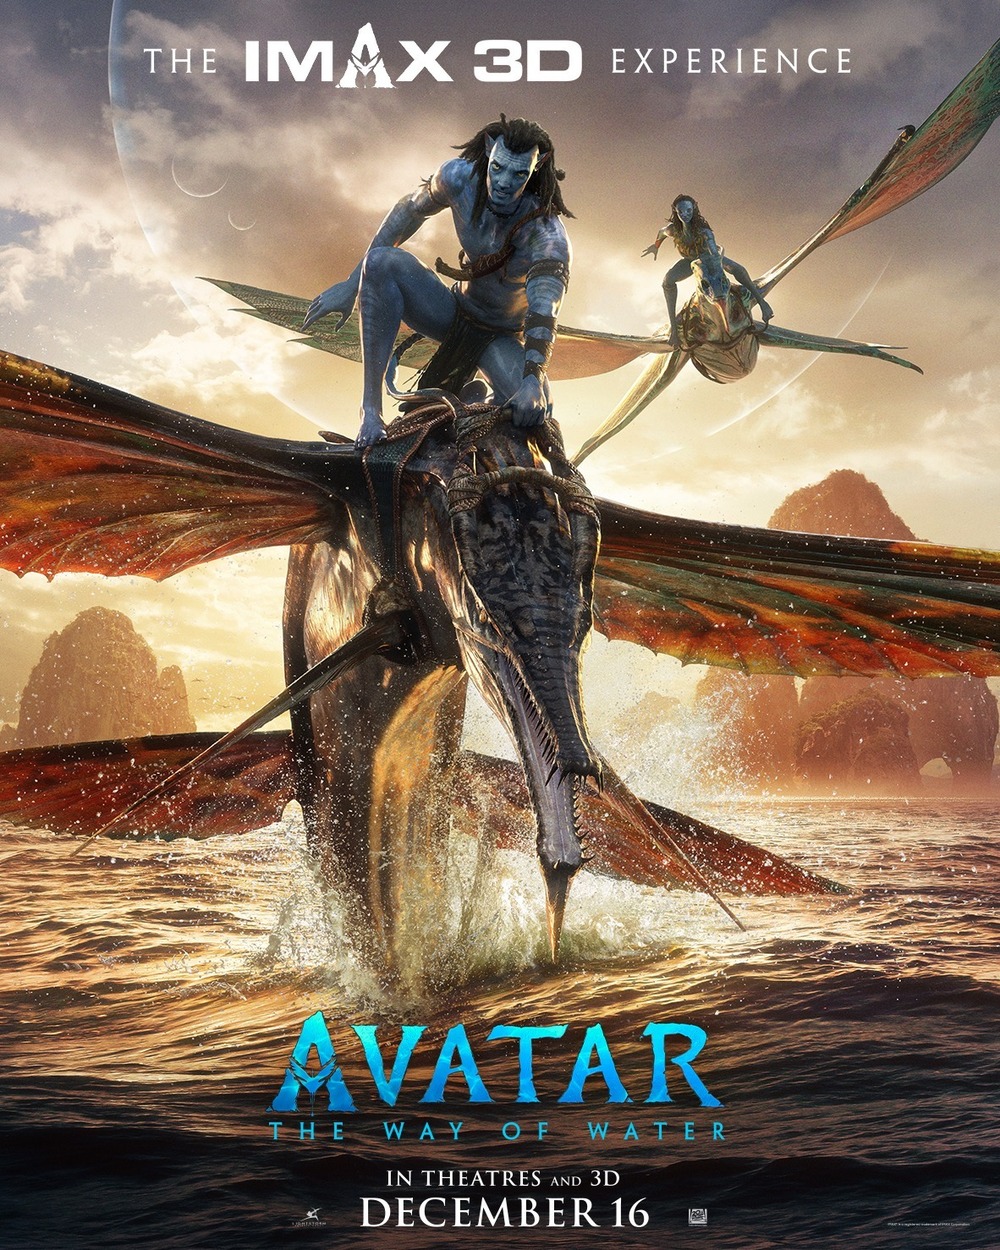 Avatar 2 VOD Release Date Where to Watch The Way of Water At Home